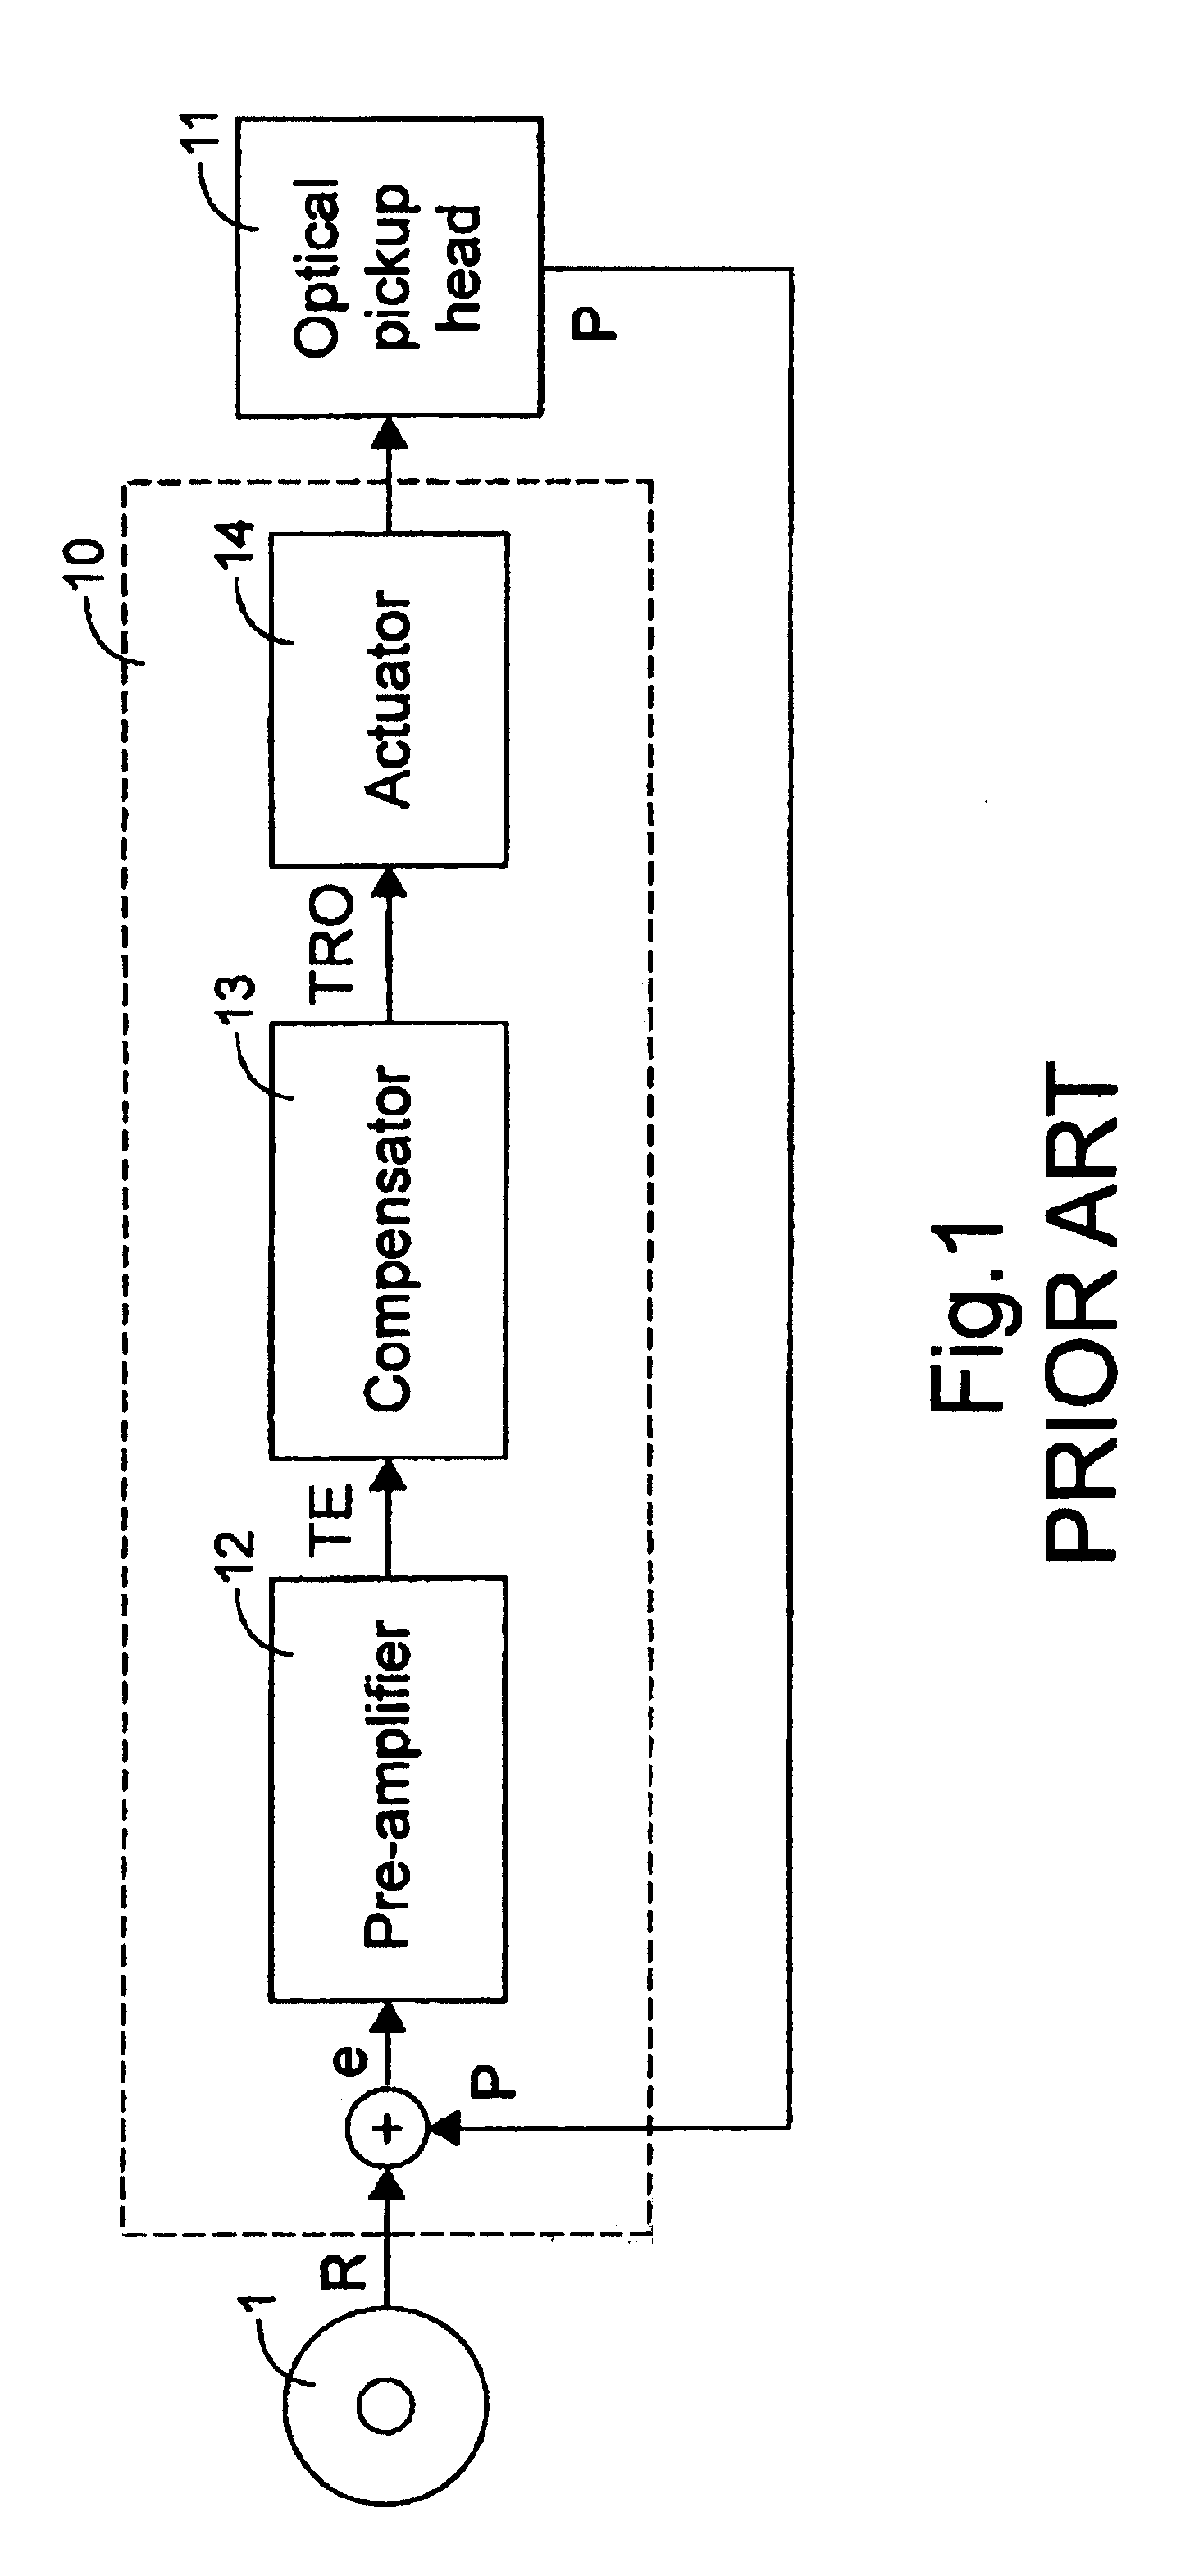 Compensation method and device for tracking operation of optical storage system